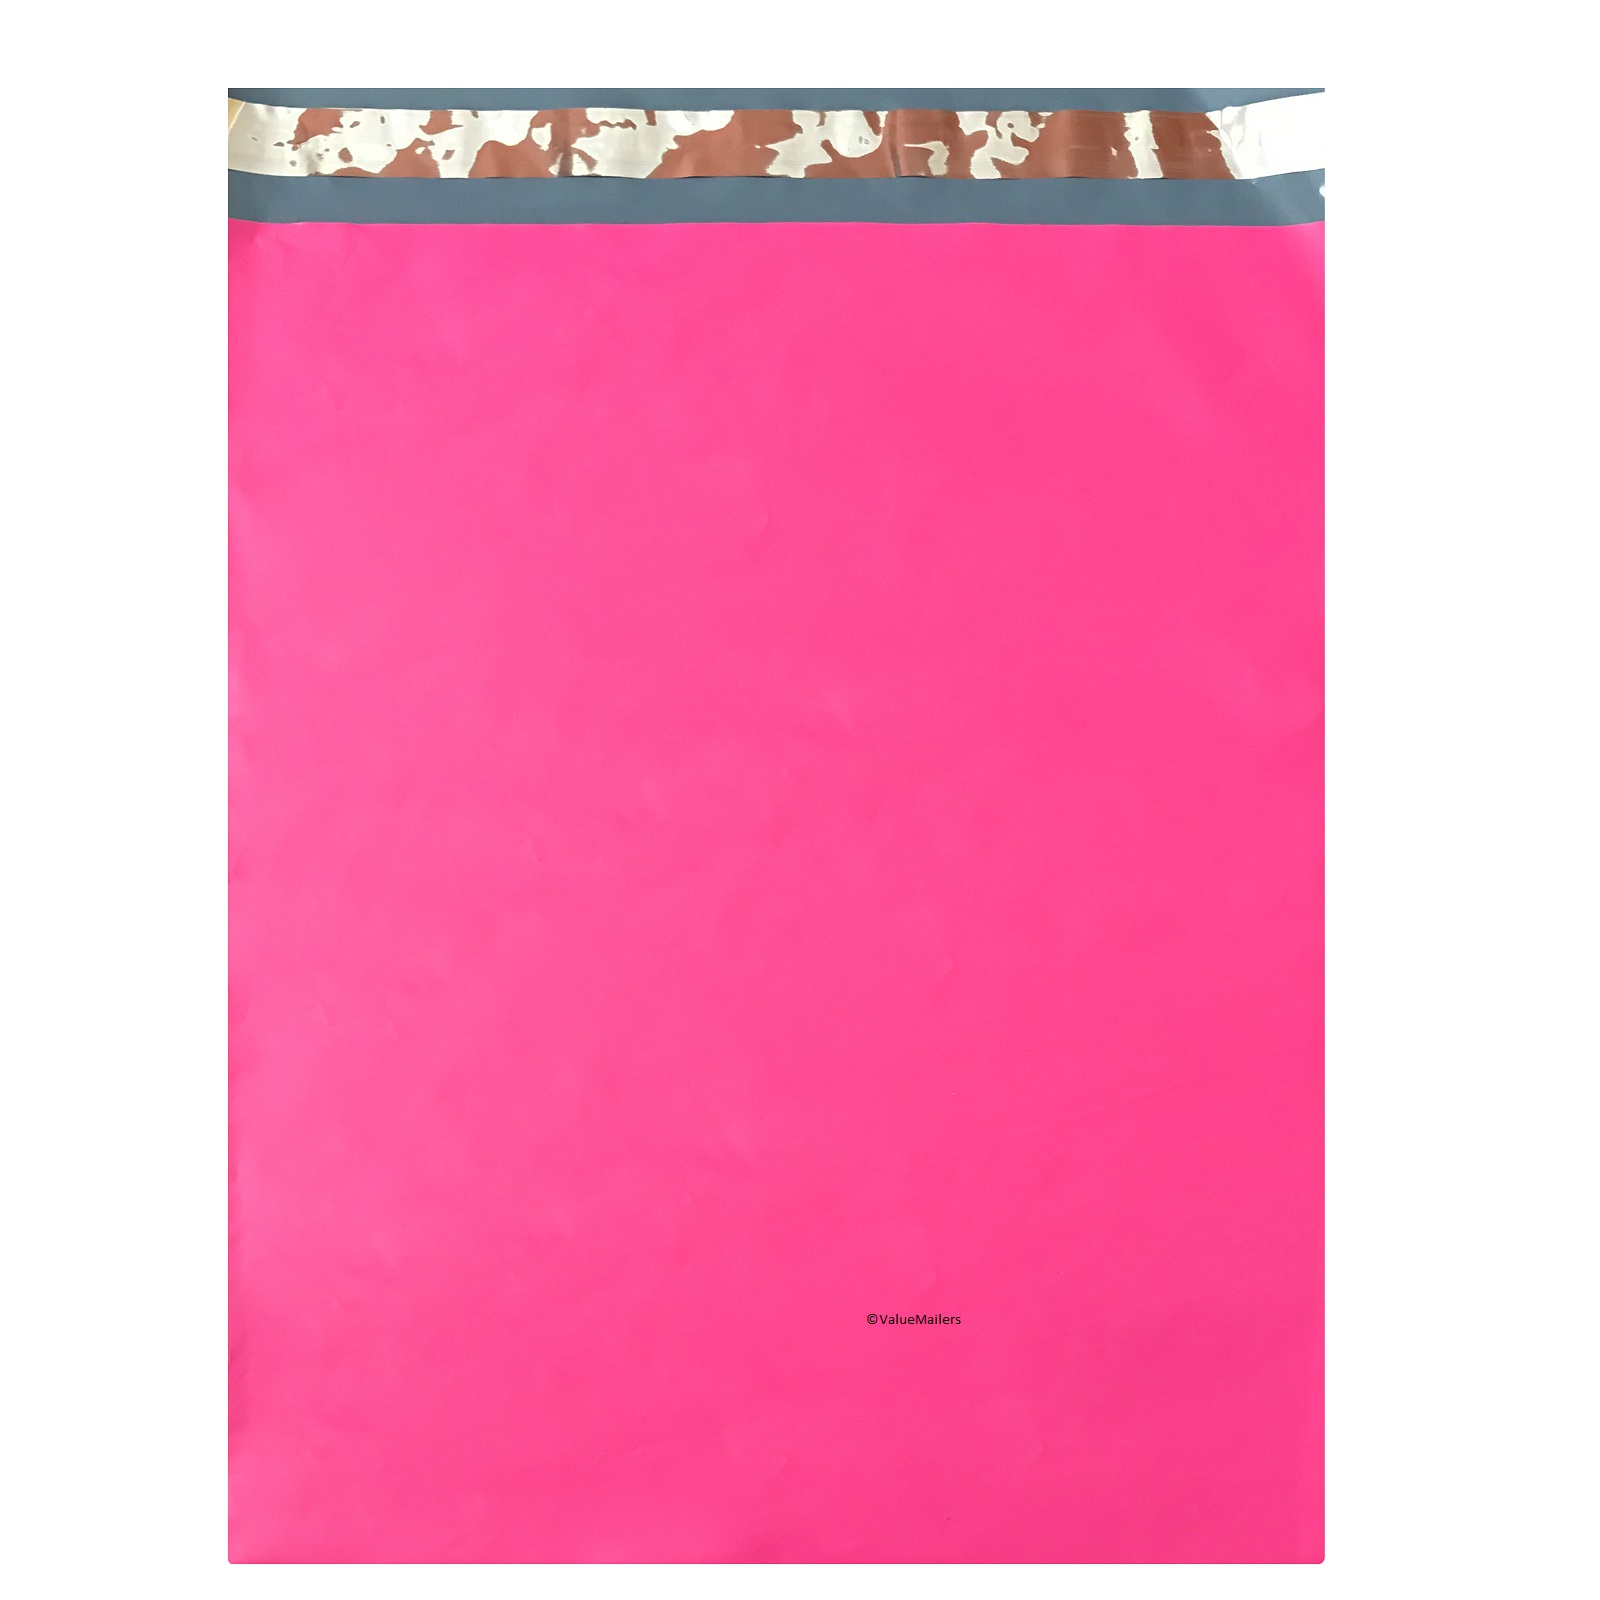 Fuxury 19x24 50pc Pink Large Poly Mailers Shipping Envelops Self Sealing Envelopes Boutique Custom Bags Enhanced Durability Multipurpose Envelopes Keep Items Safe Protected 